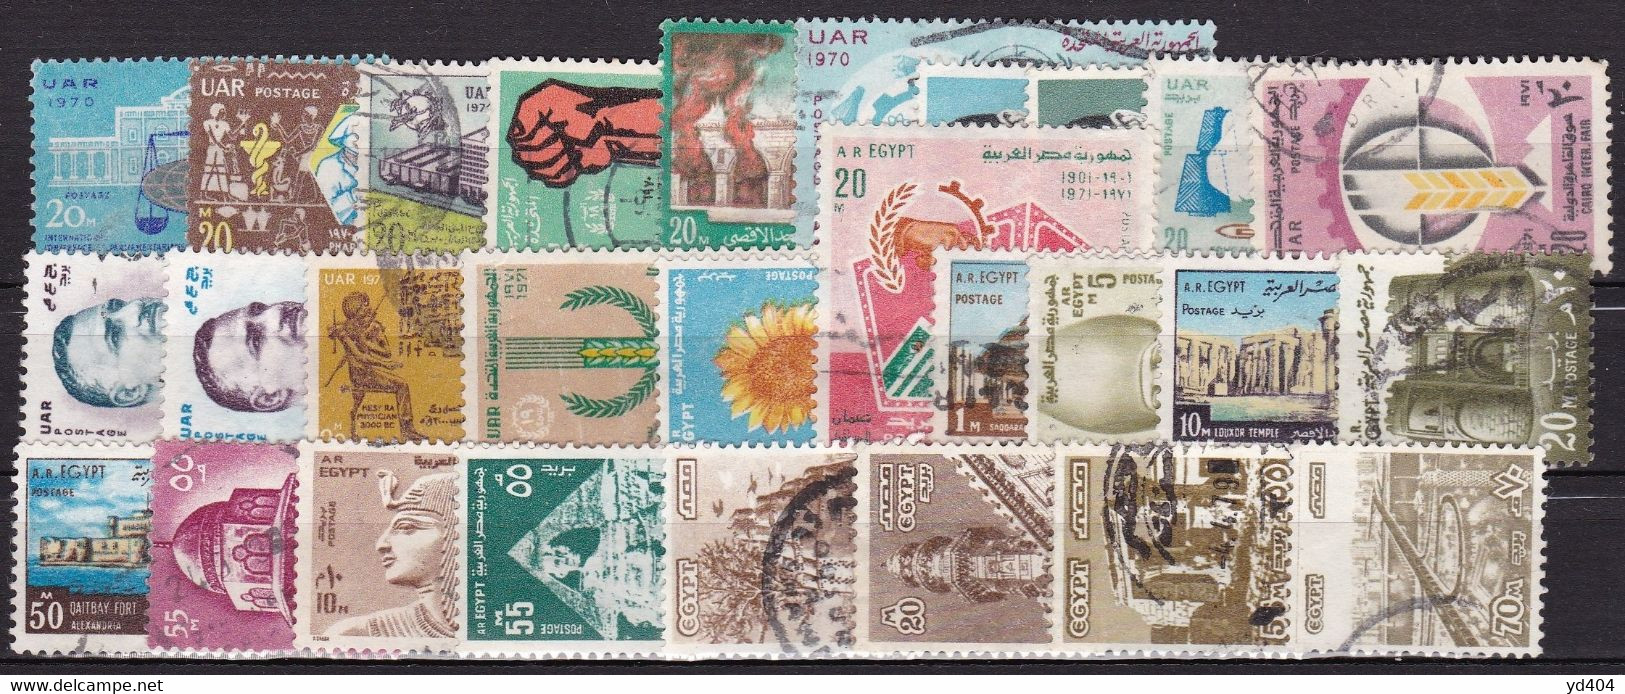 EG154 – EGYPTE – EGYPT - 1970→1979 - NICE COLLECTION – Y&T # 805→1092 USED 8,25 € - Usati